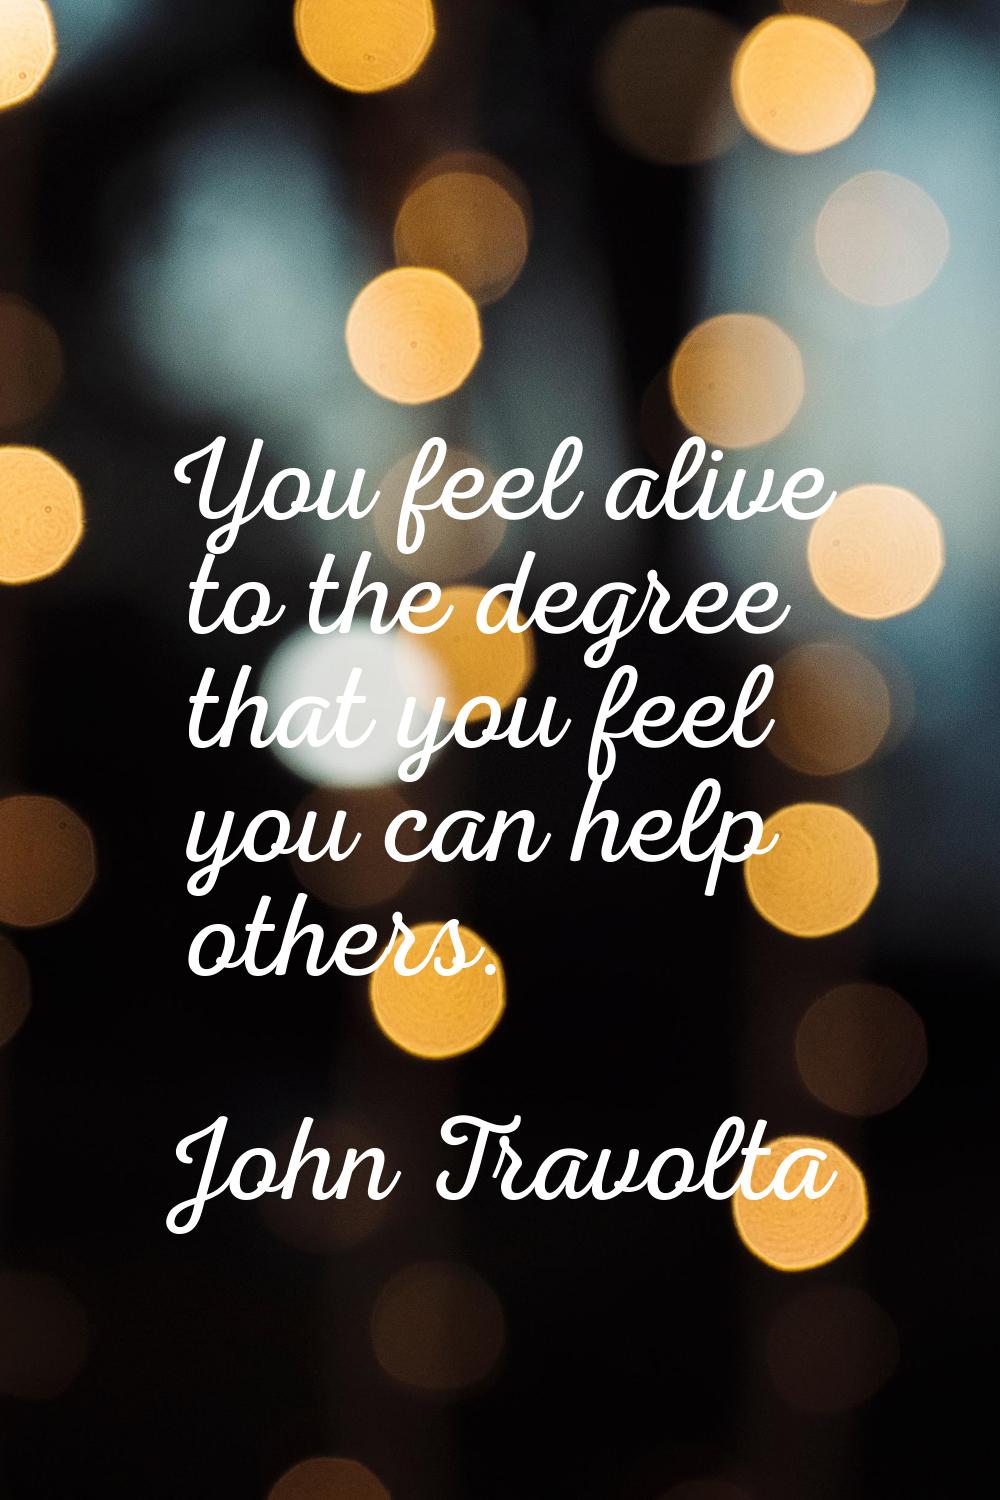 You feel alive to the degree that you feel you can help others.